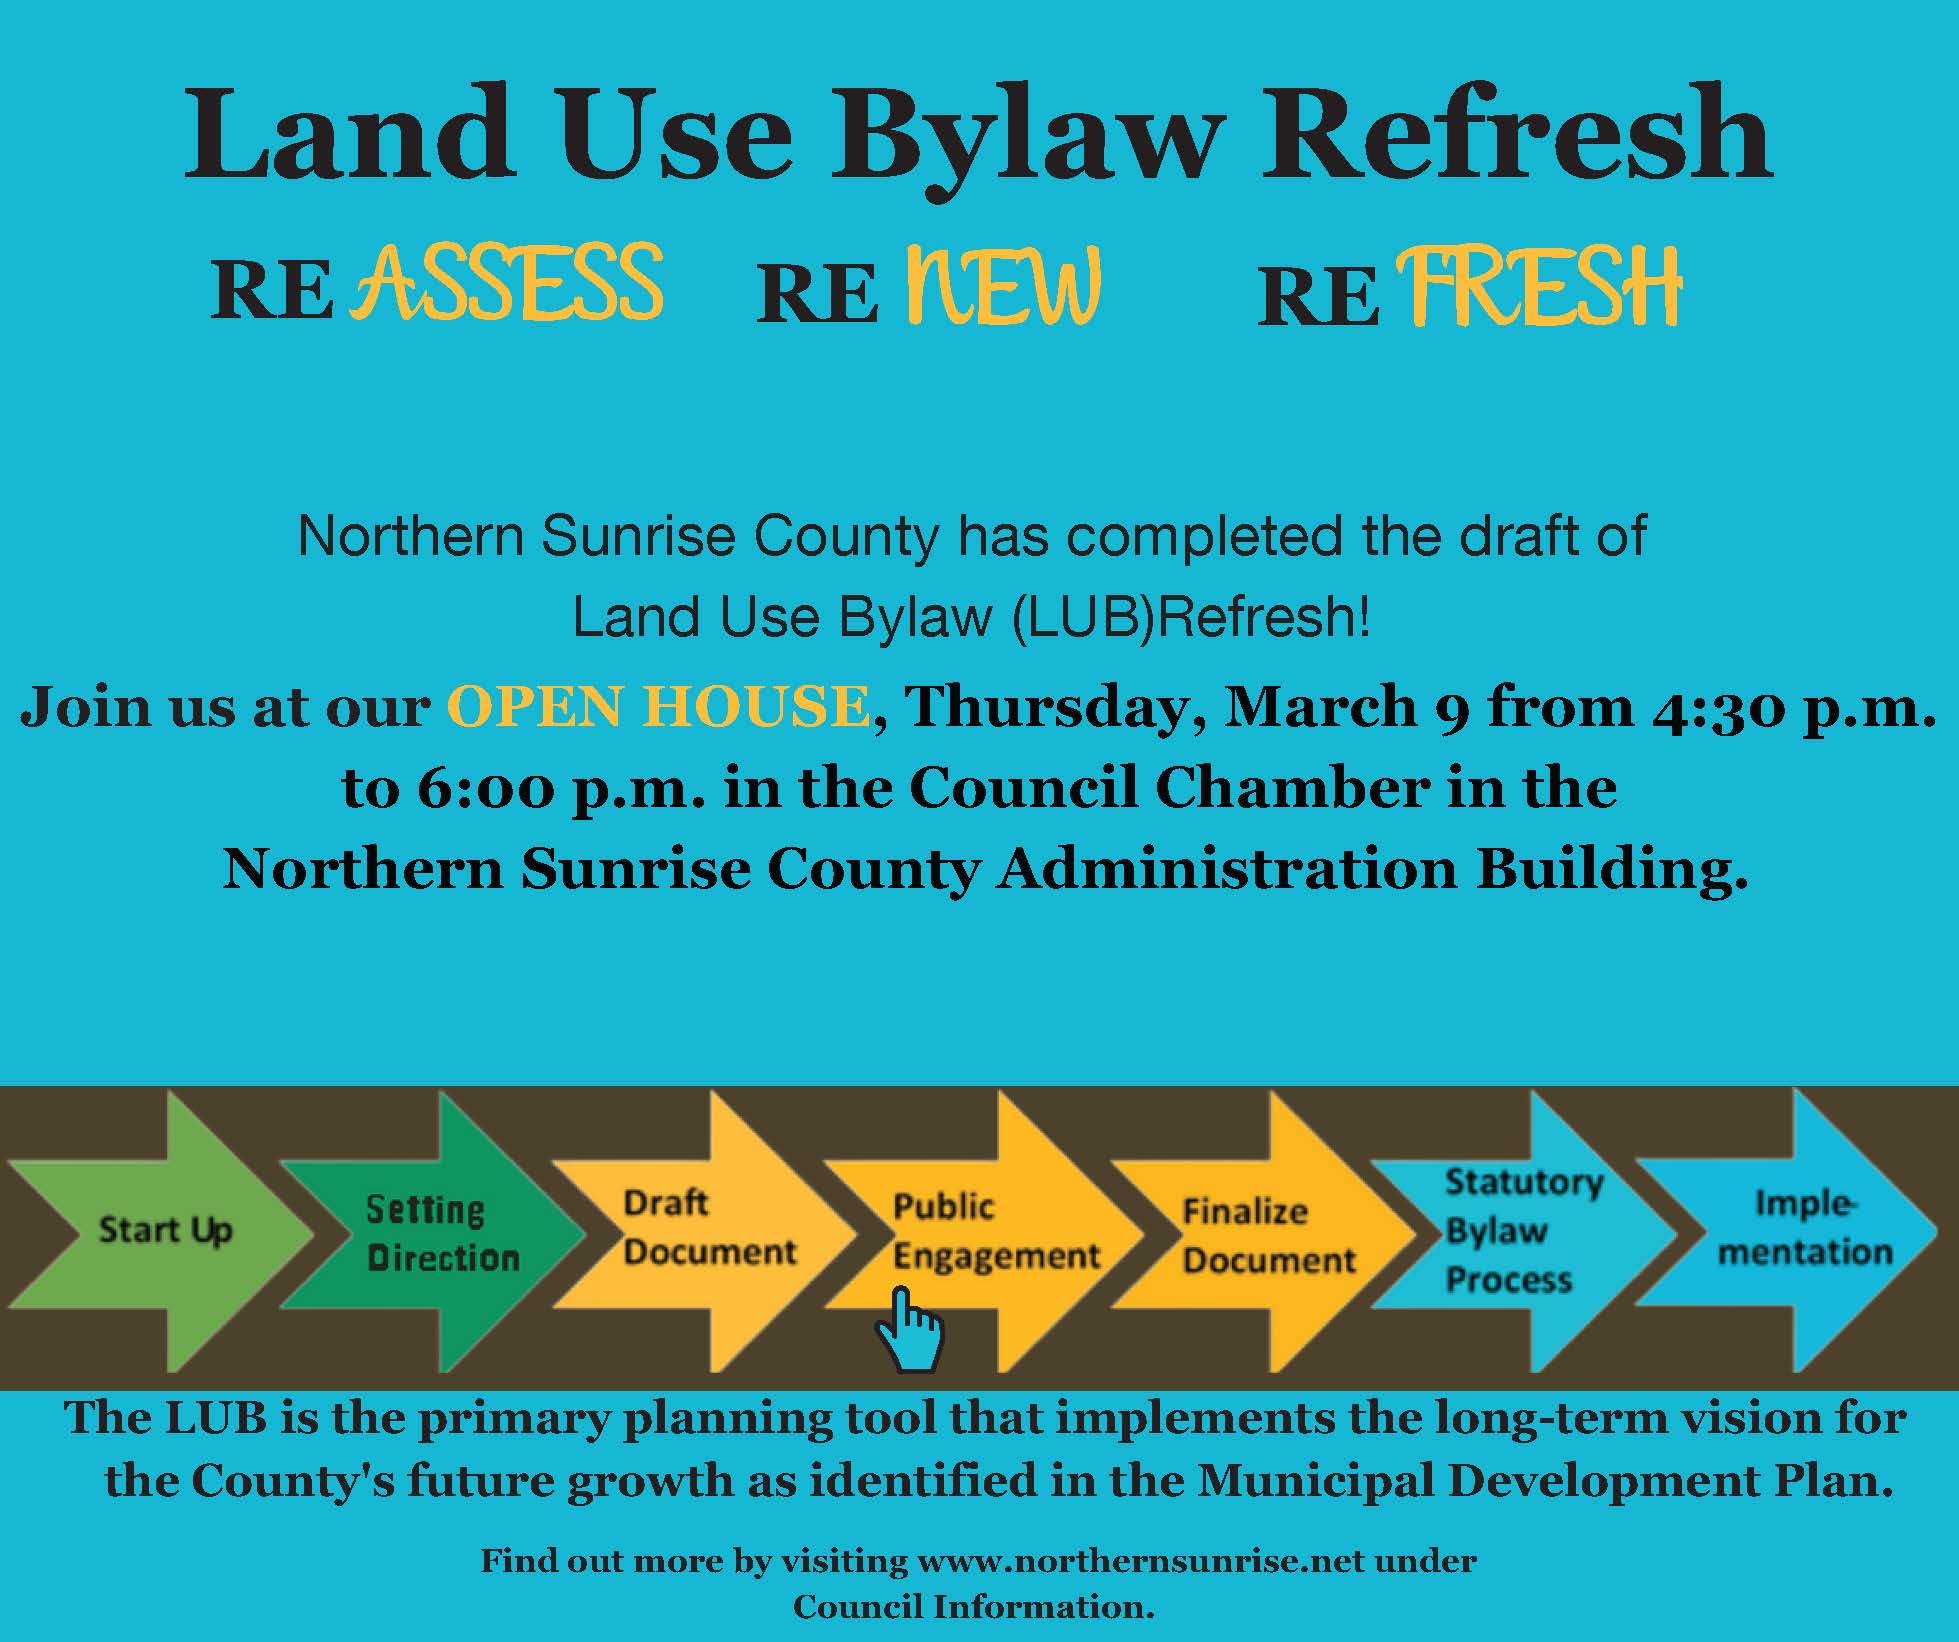 Featured image for “Land Use Bylaw Refresh”